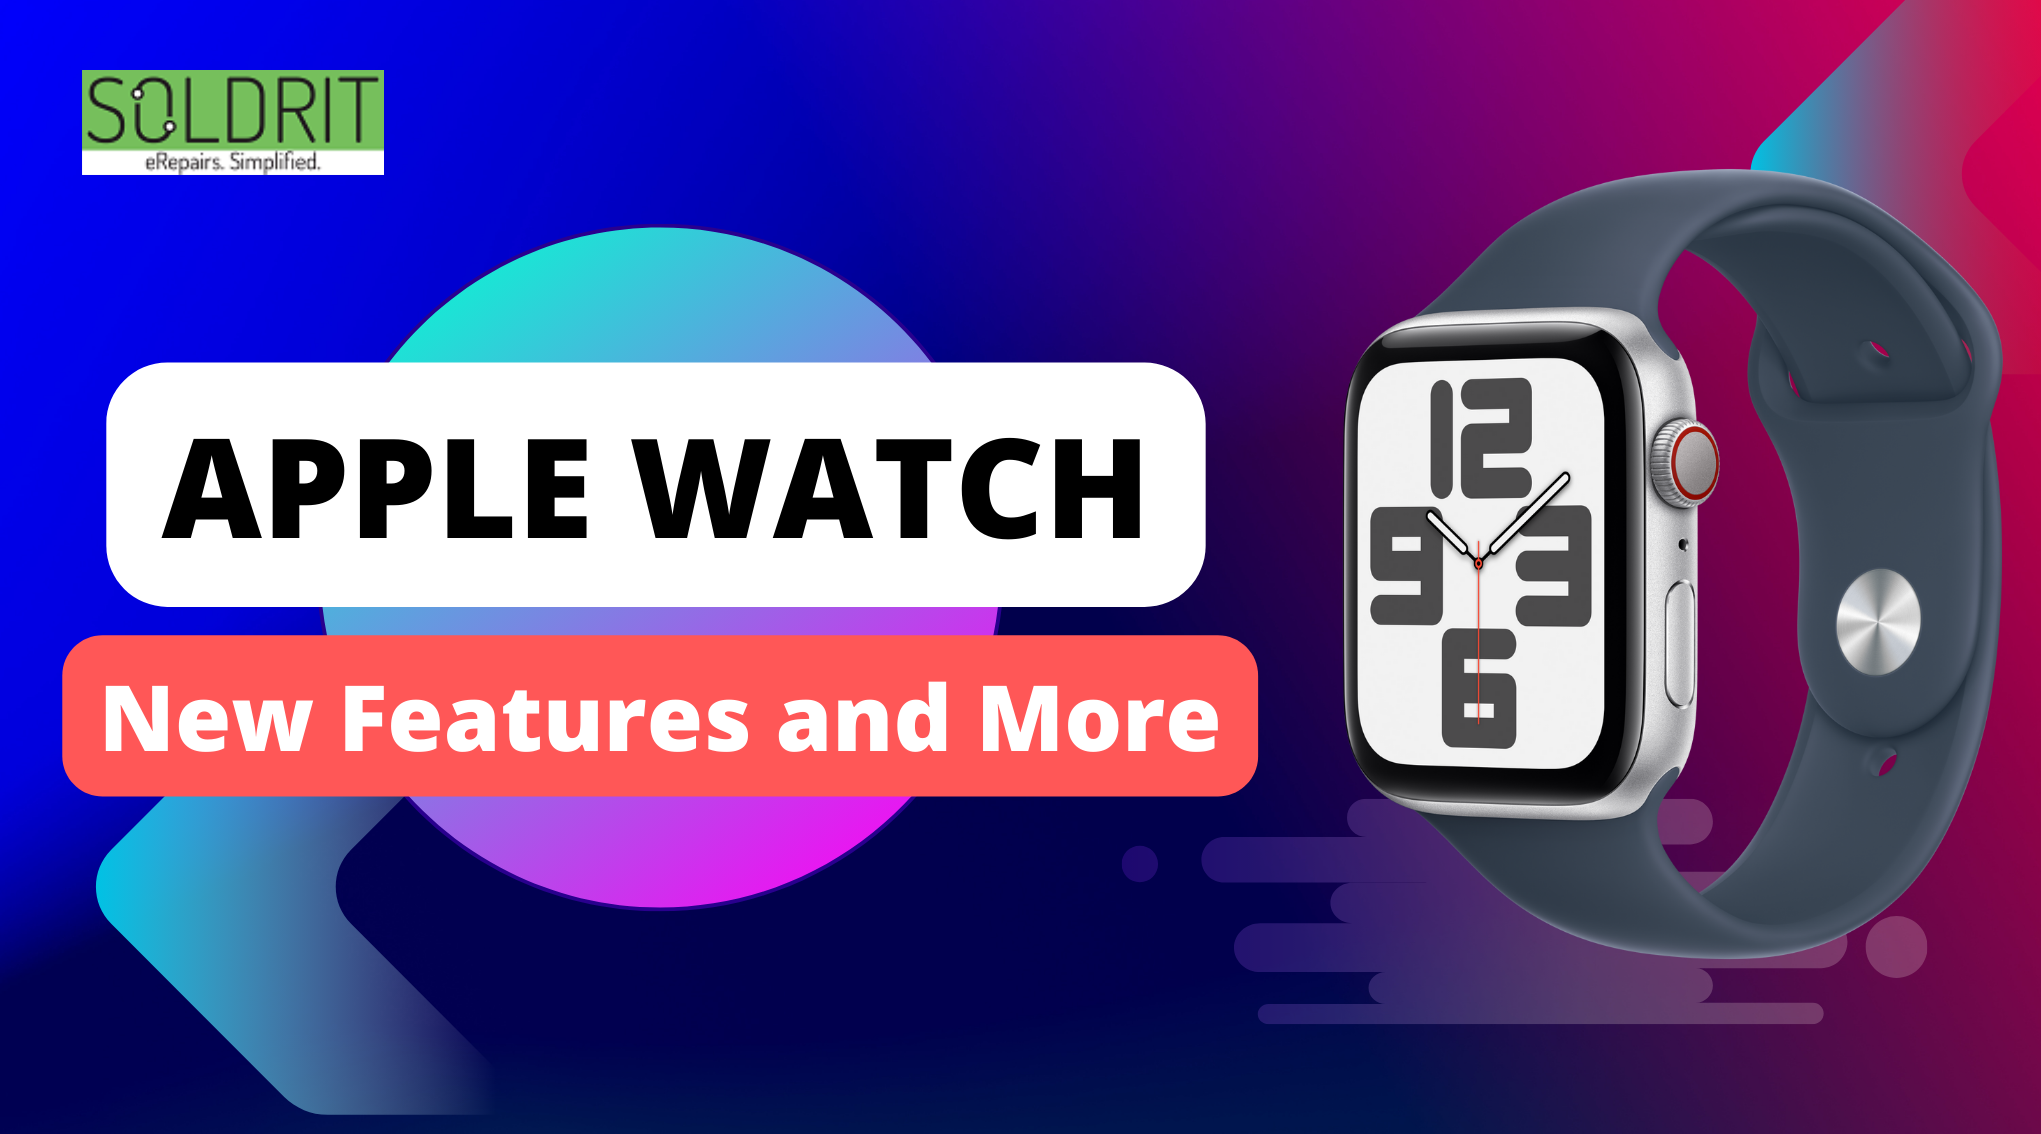 Apple Watch in New Features and More